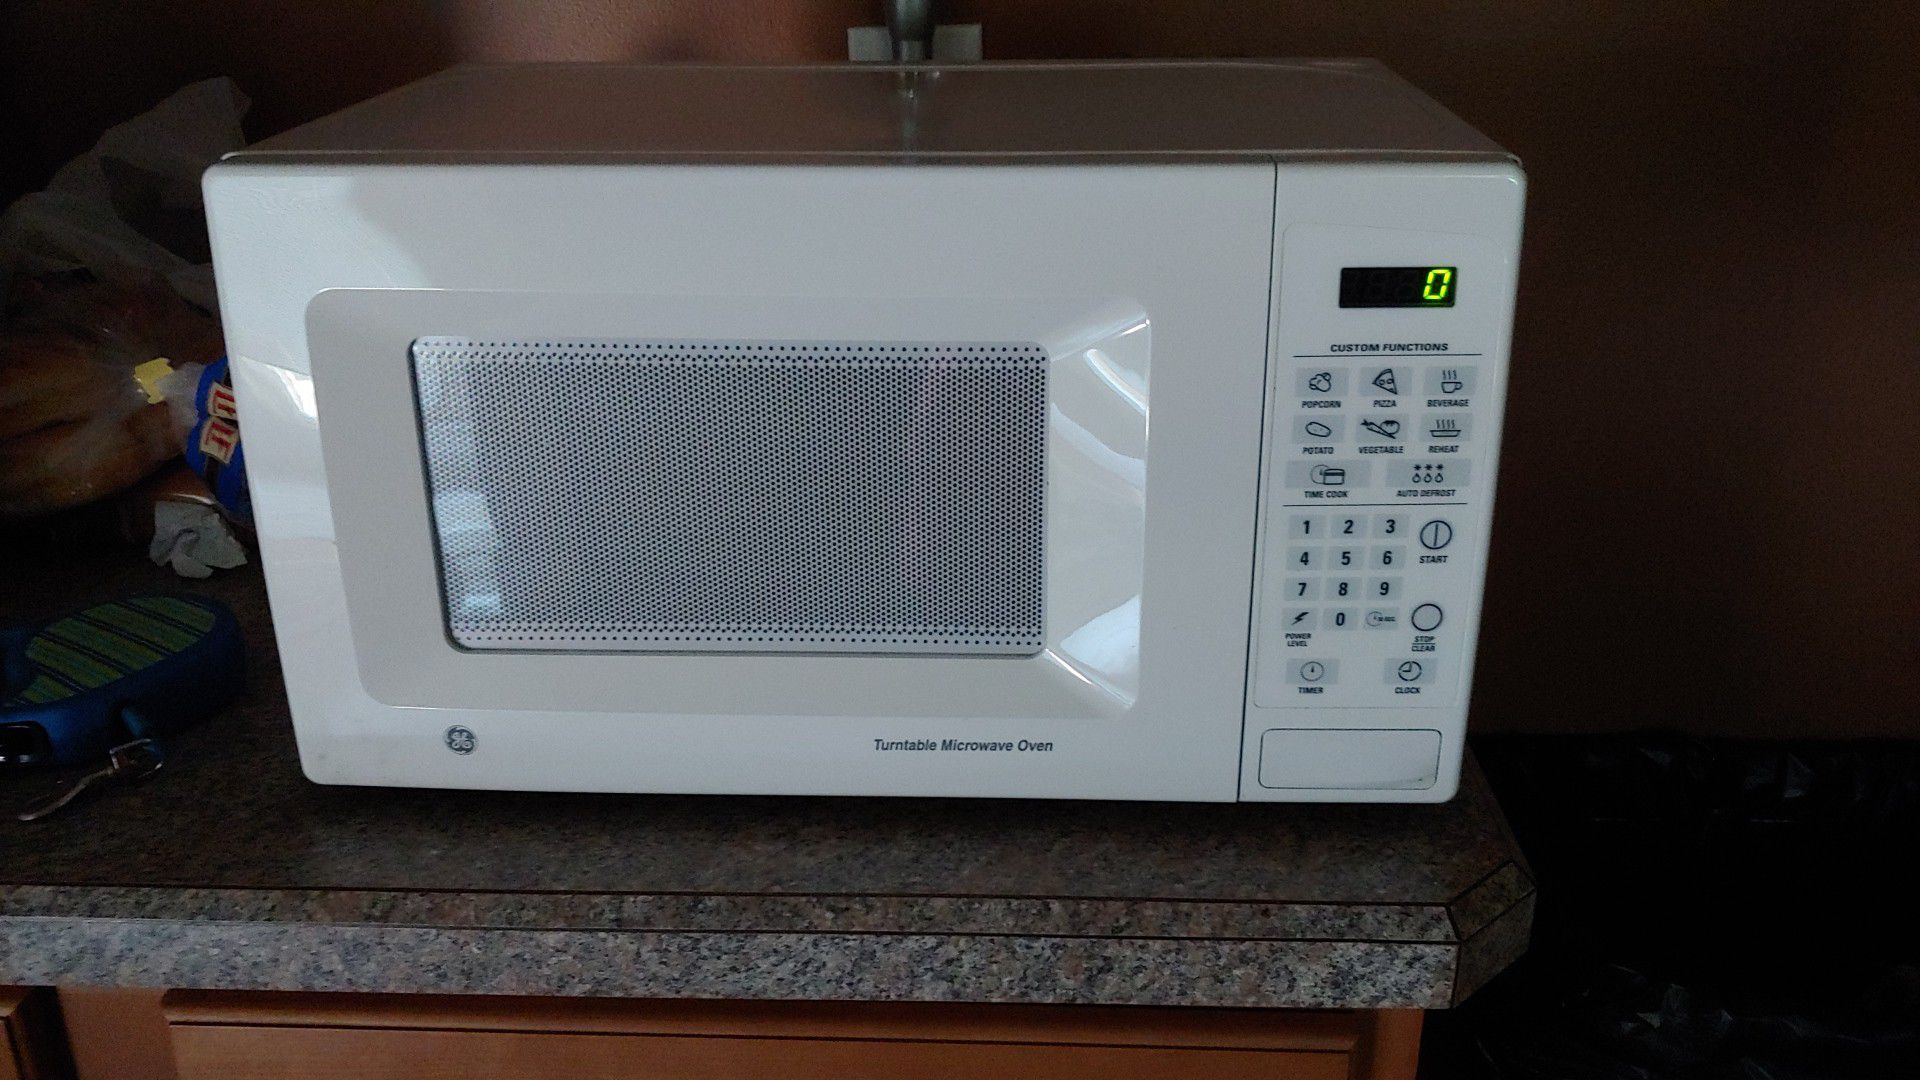 GE Turntable microwave oven $10